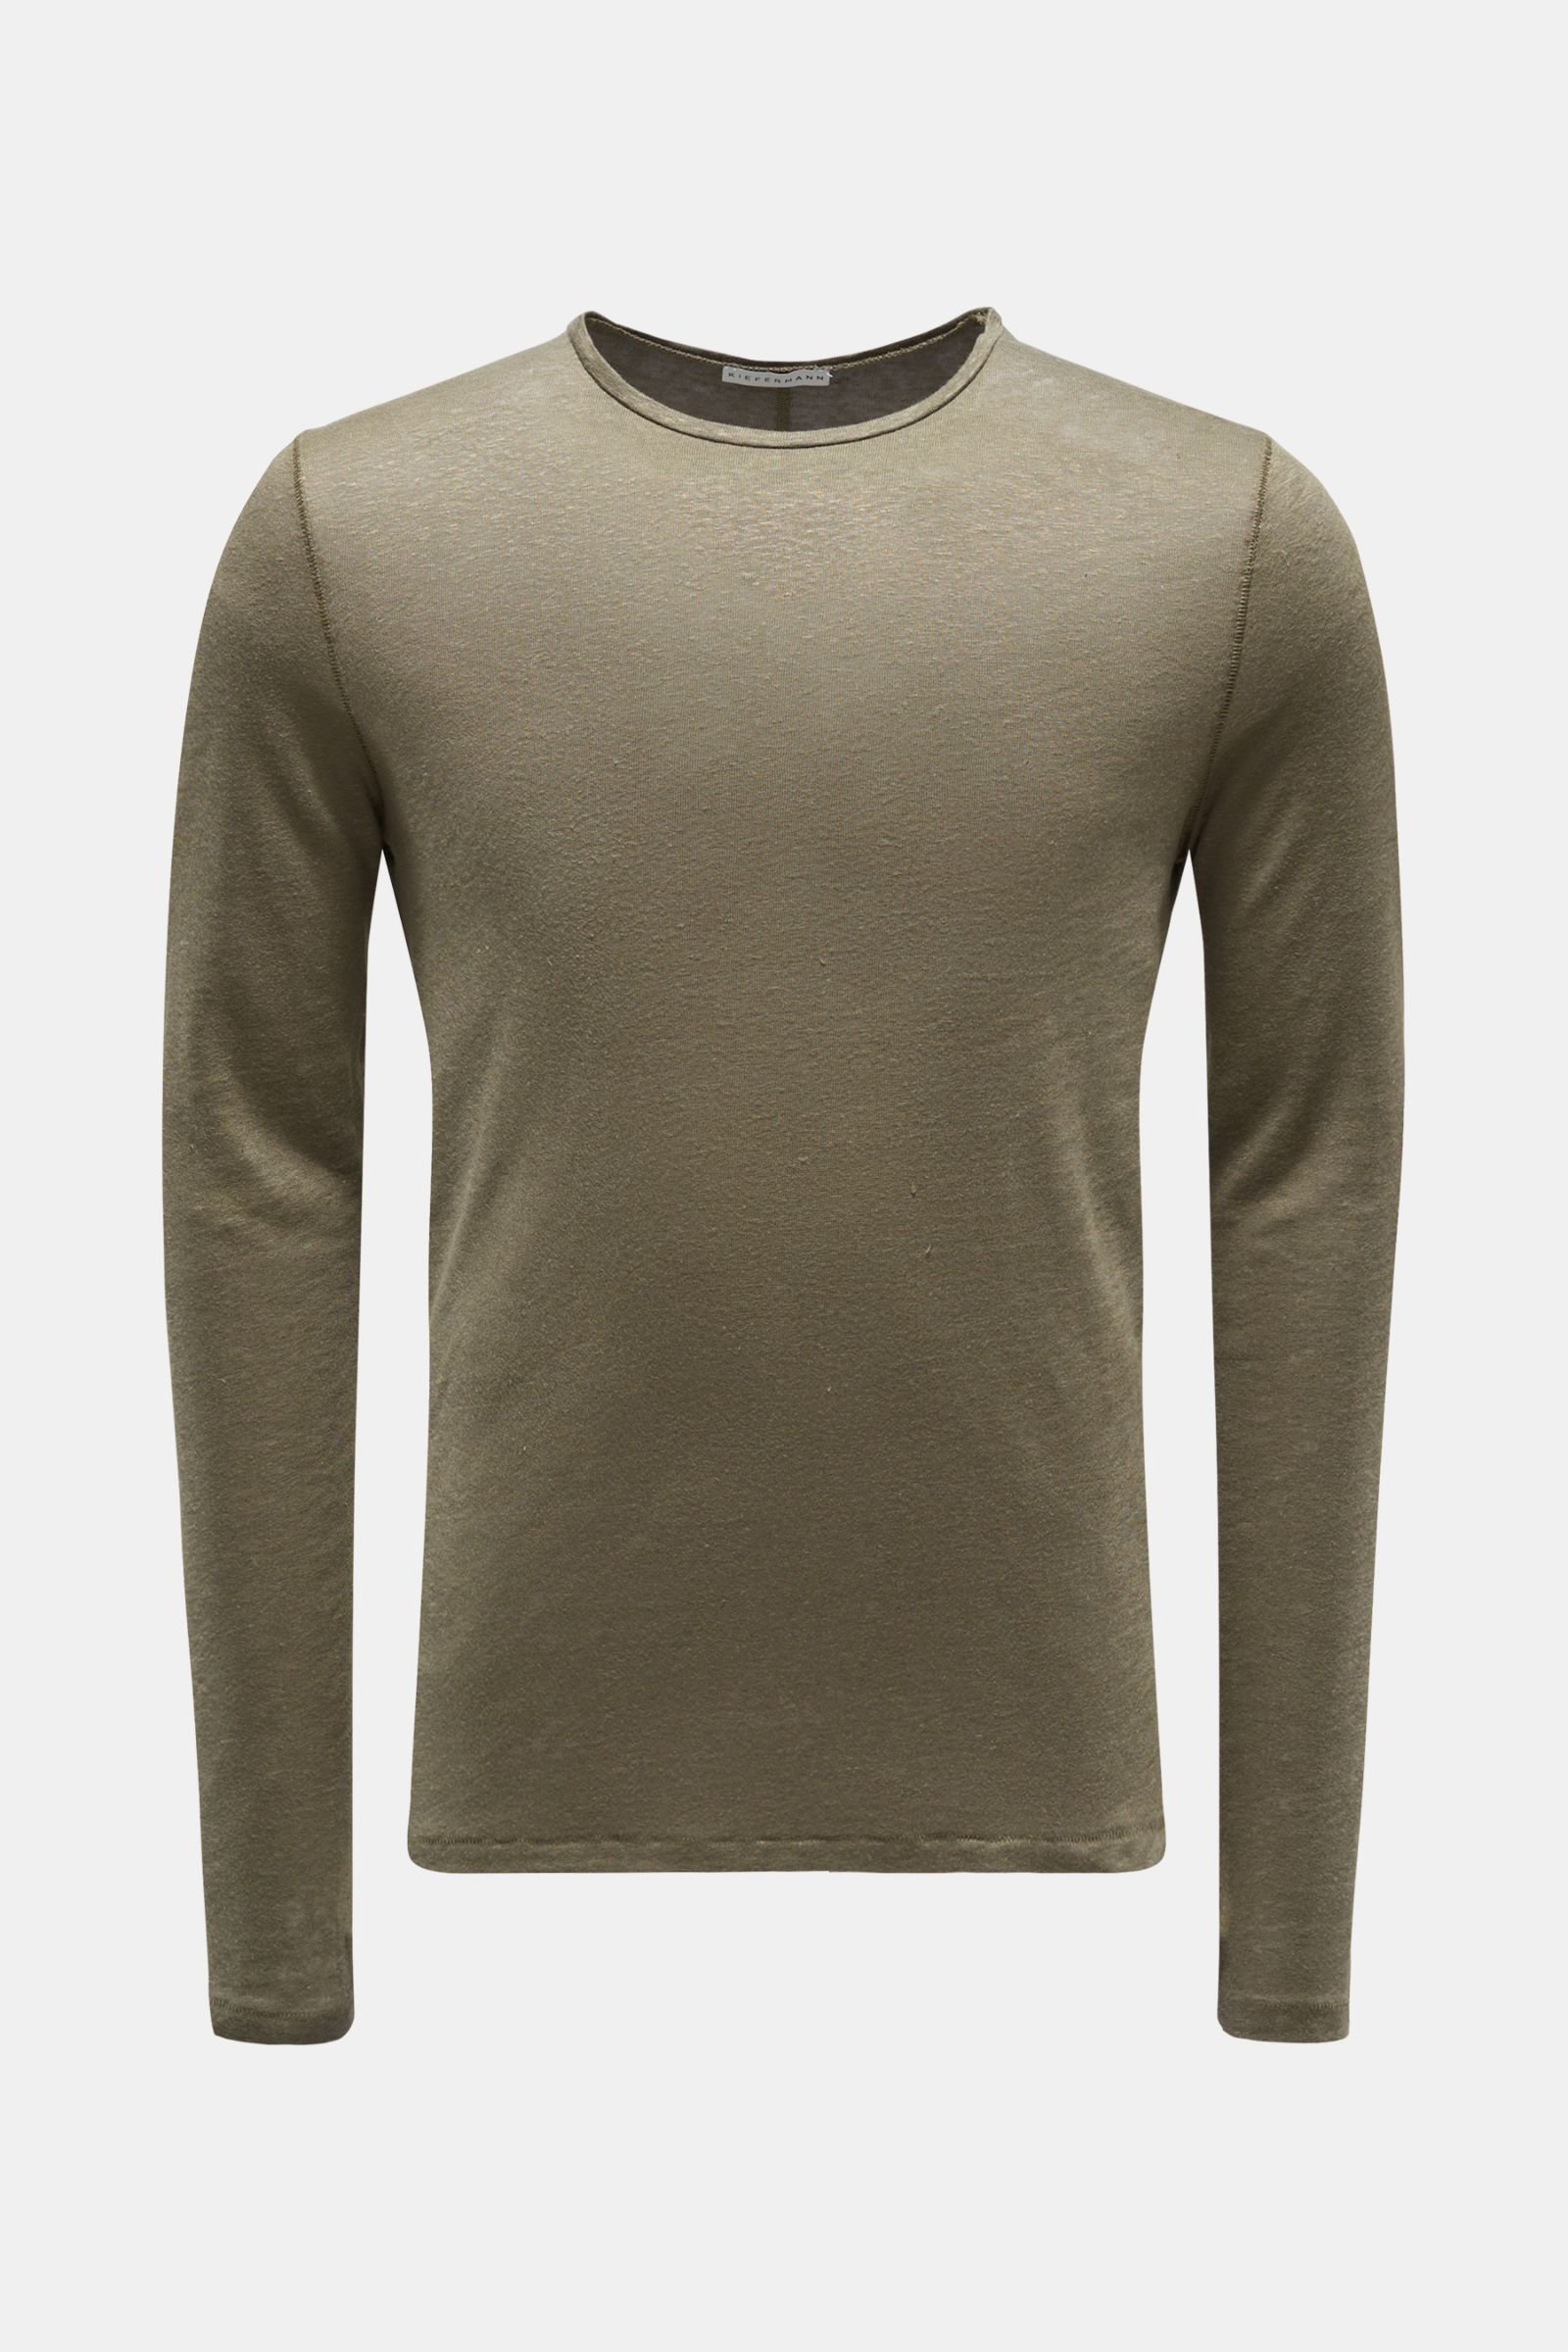 Linen crew neck long sleeve 'Olly' olive